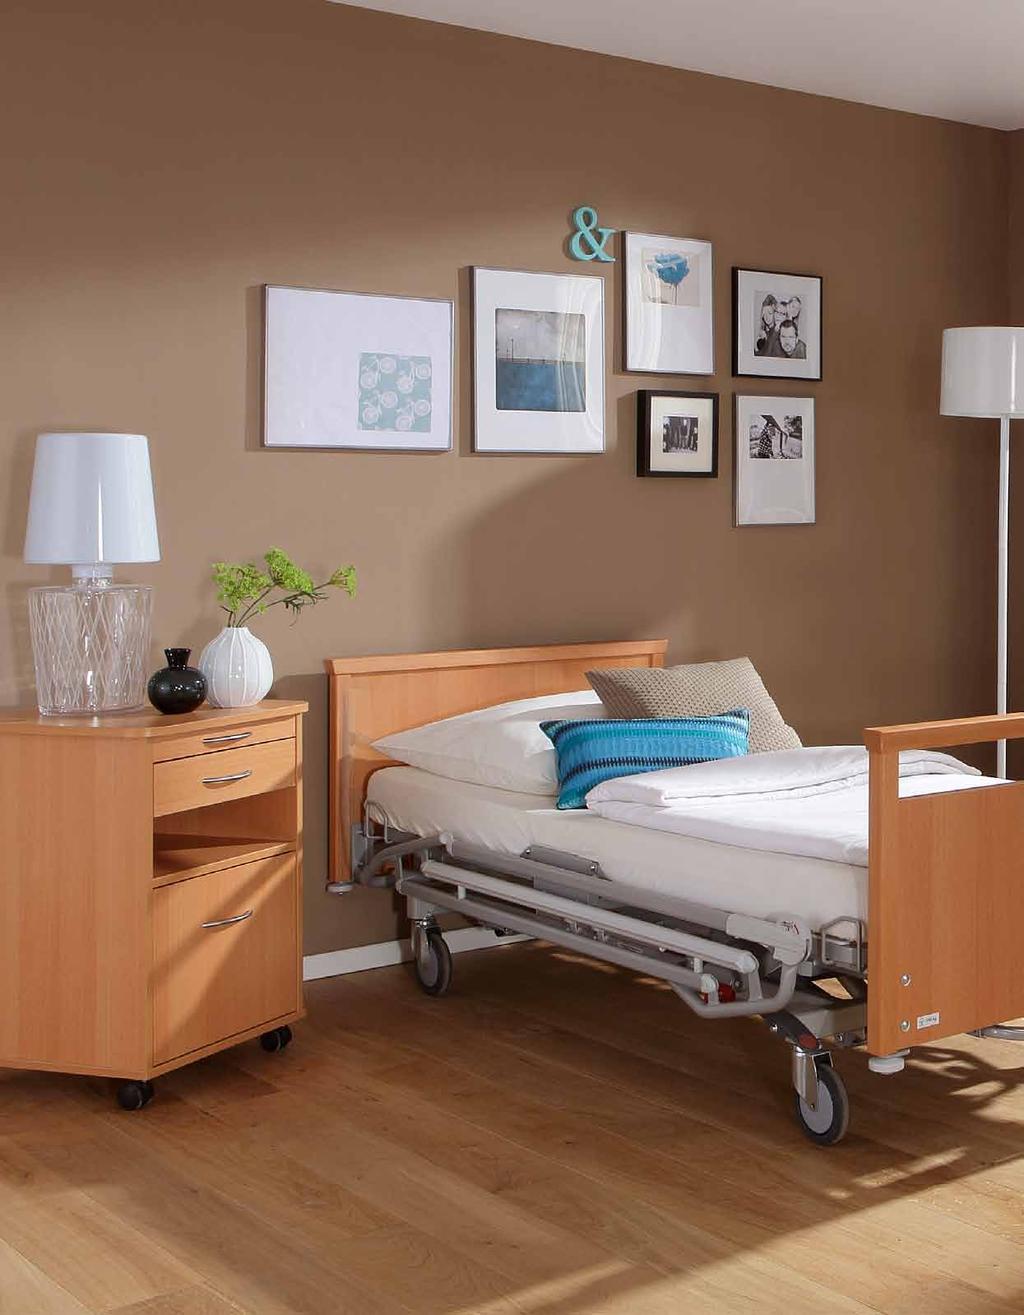 The Eleganza 1 bed has full electrical positioning and brings the quality and range of functions intended for acute healthcare into the area of longterm care adapting